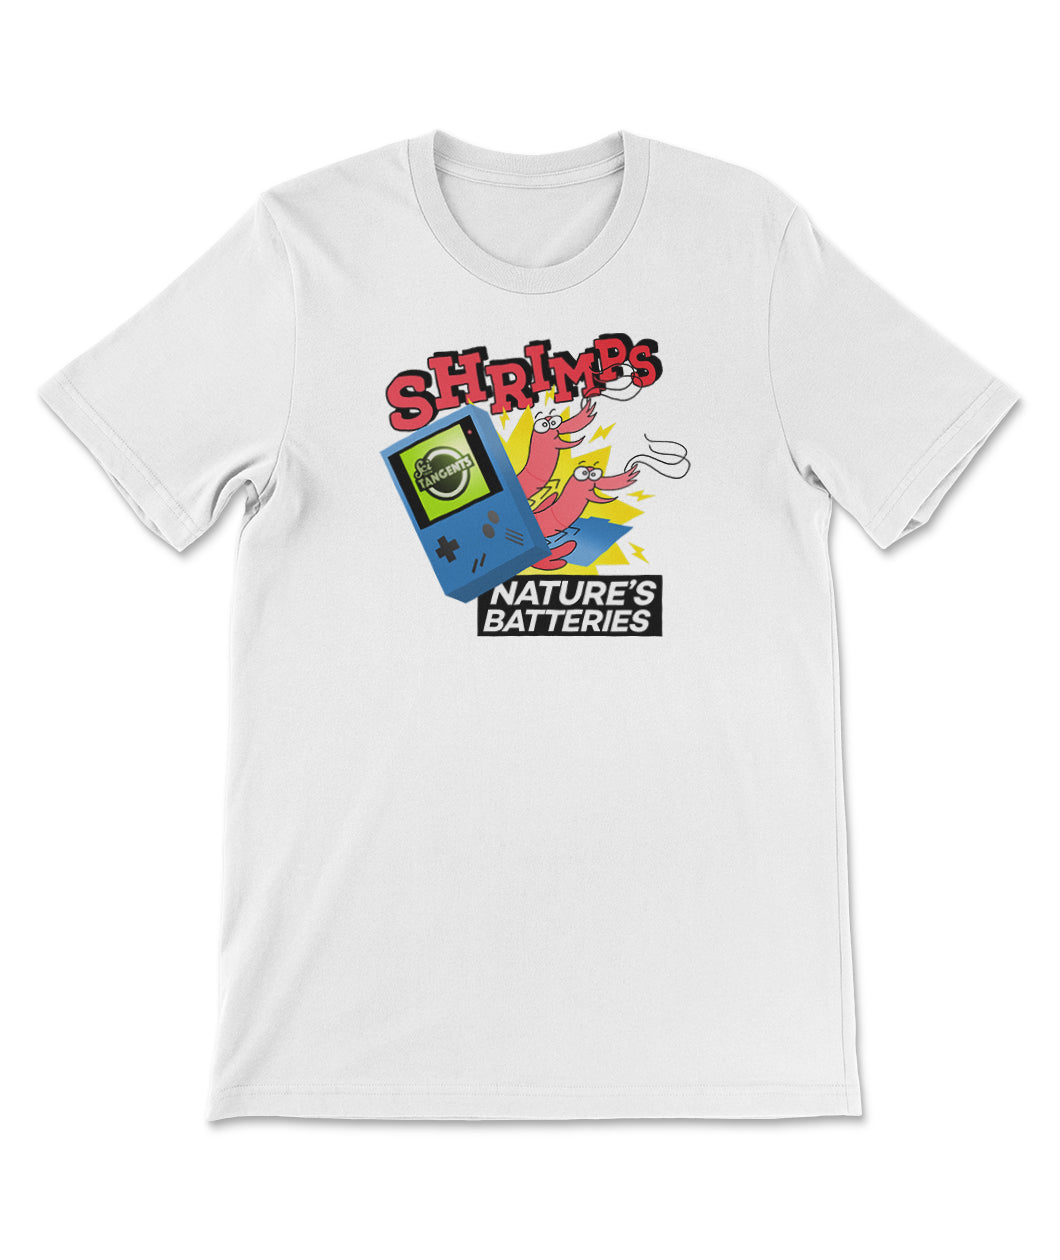  A white t-shirt with a print on the front of a MP3 player with the Scishow Tangents podcast playing and two shrimp popping out behind it. The text on the shirt reads "Shrimps; Nature's Batteries". 